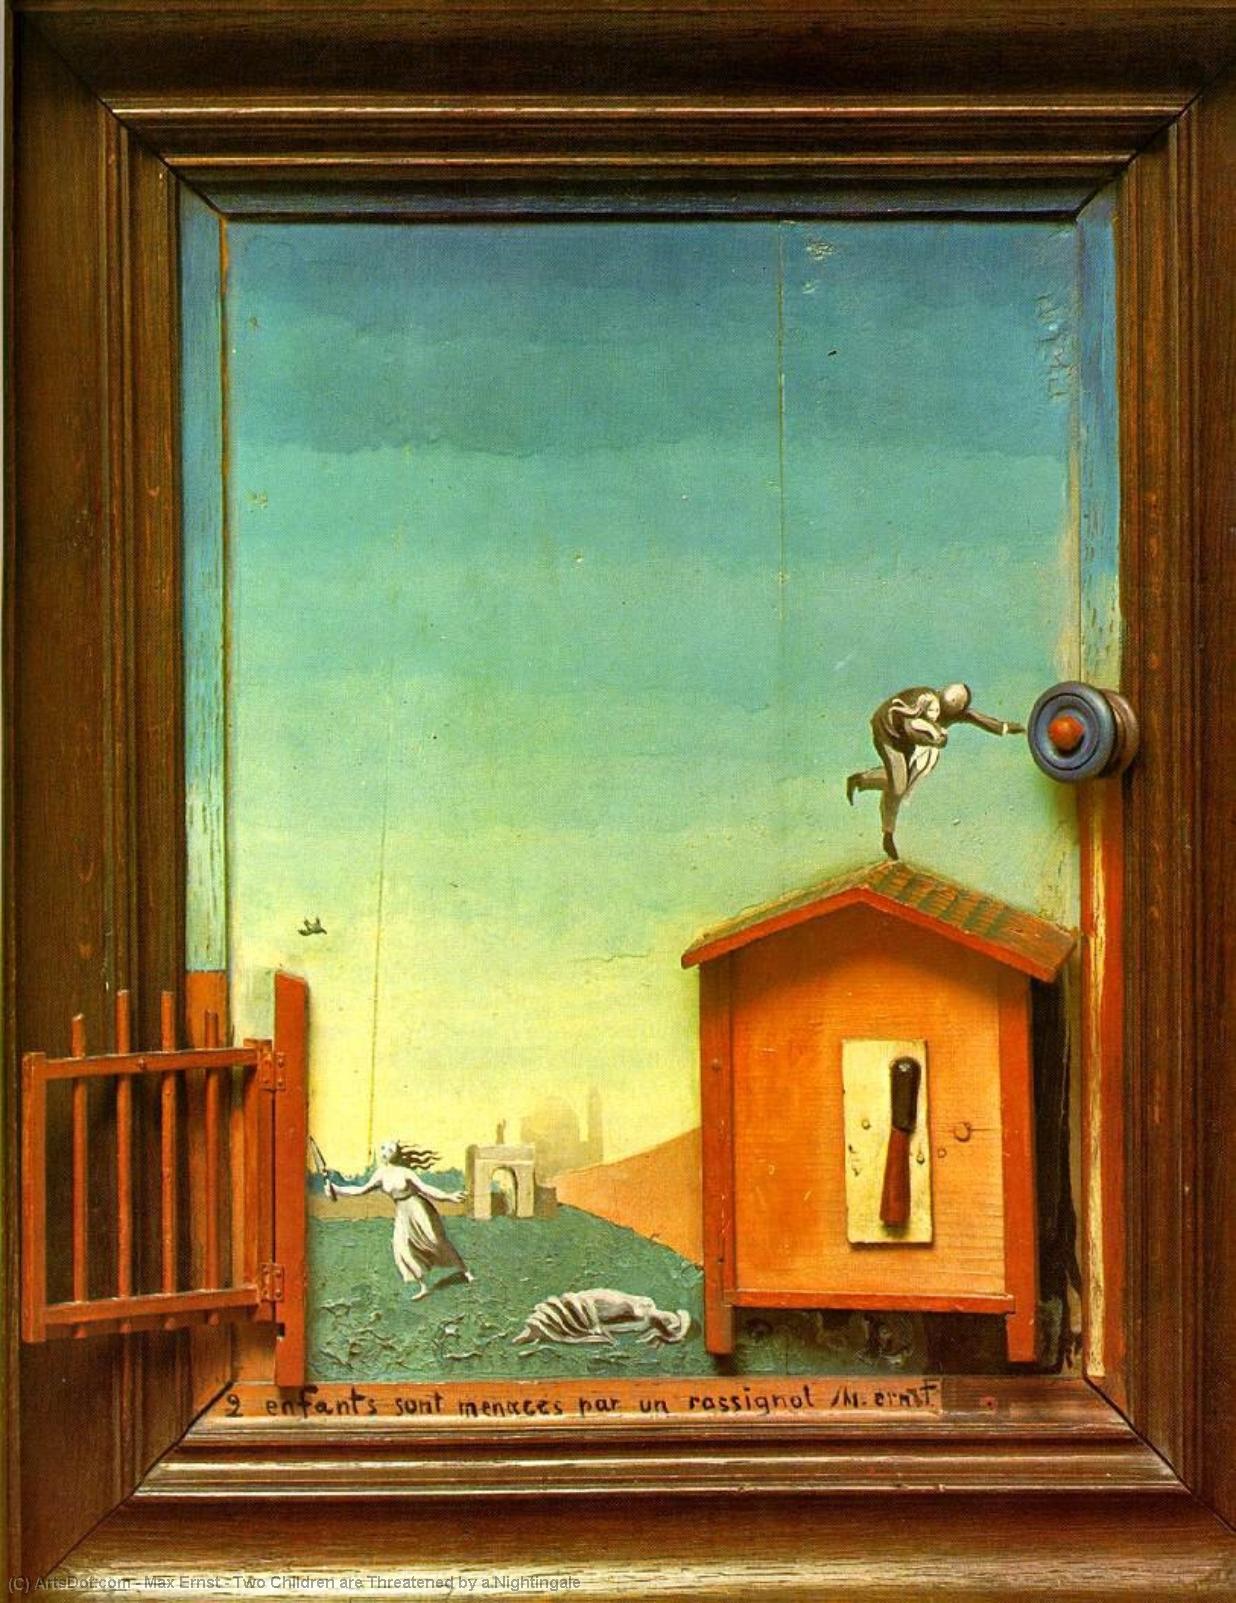 WikiOO.org - Encyclopedia of Fine Arts - Lukisan, Artwork Max Ernst - Two Children are Threatened by a Nightingale